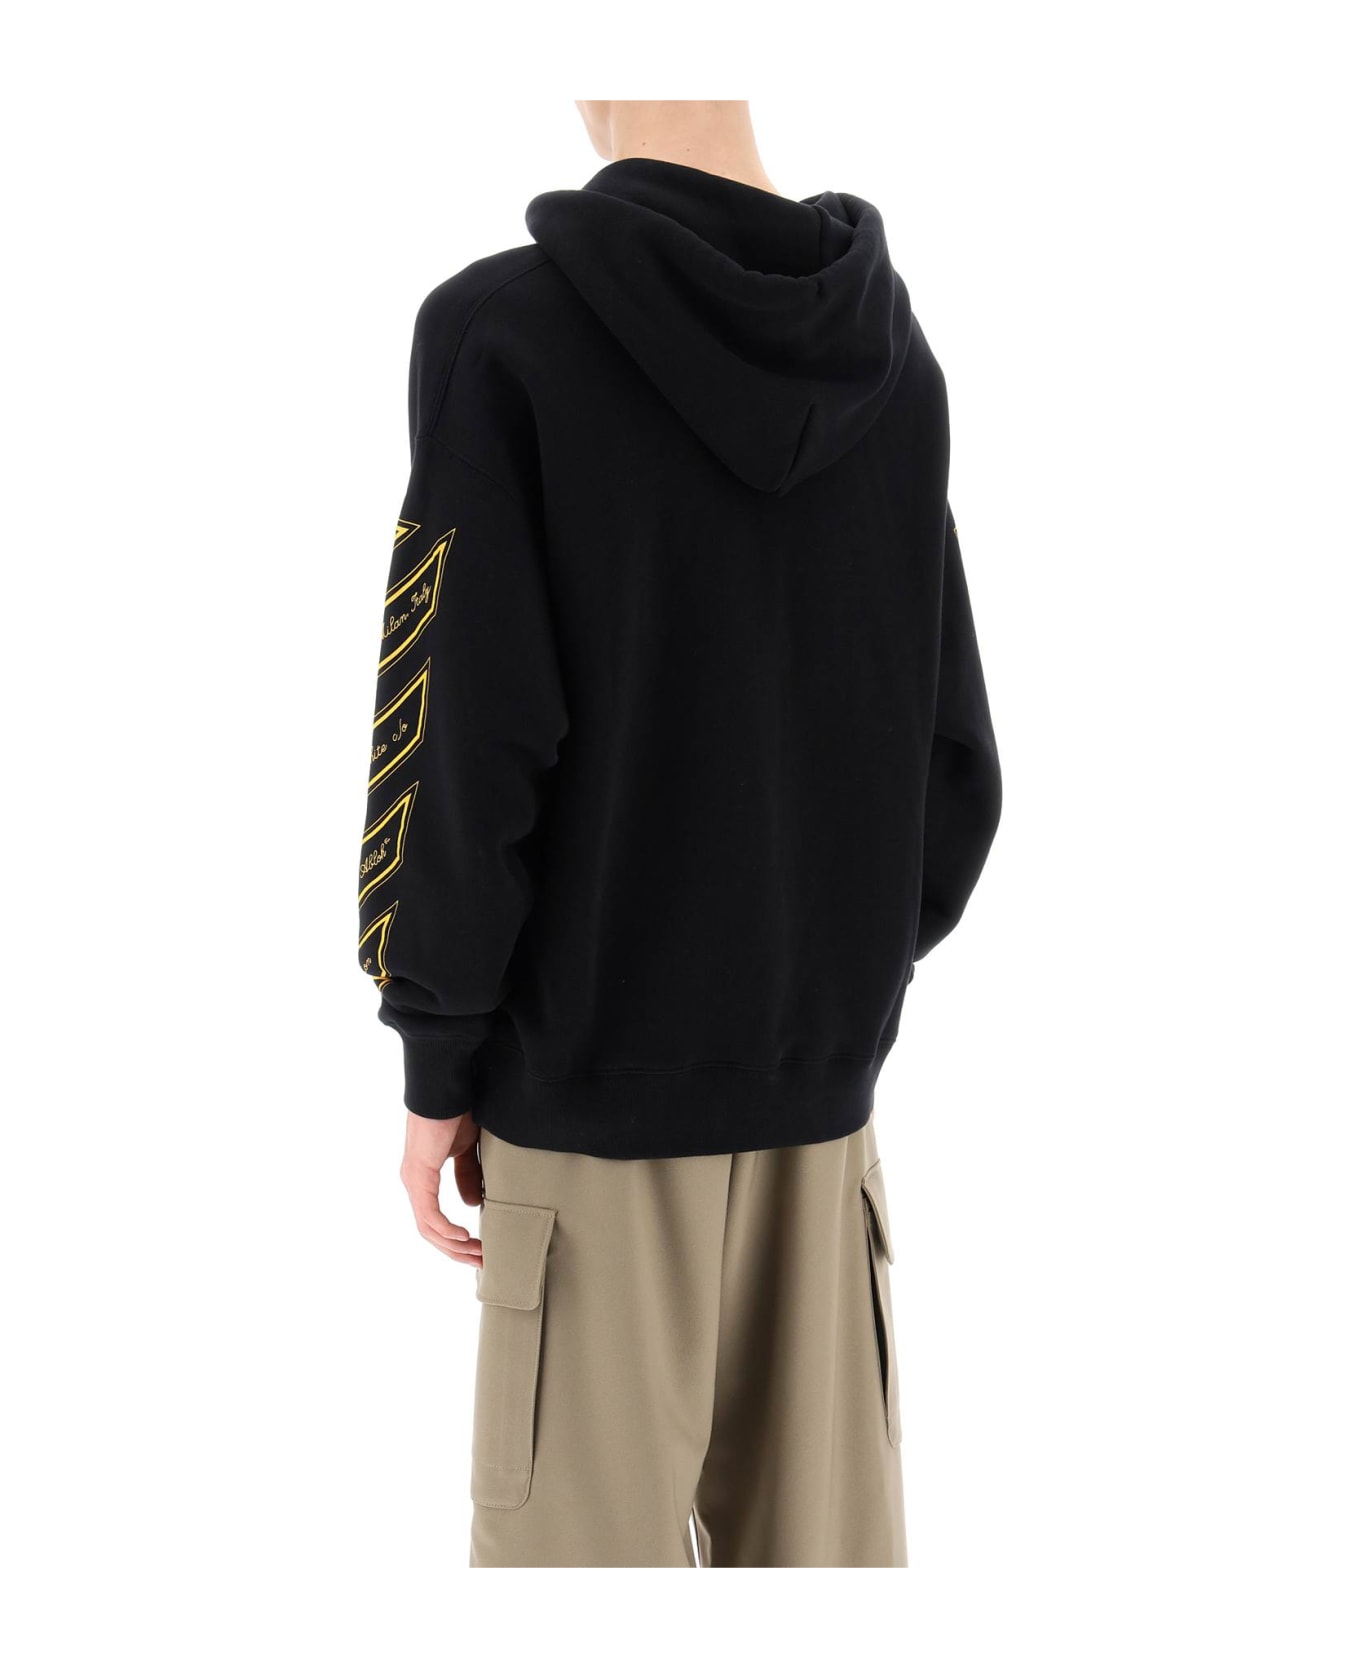 Off-White Hoodie - Black Gold Fusion フリース